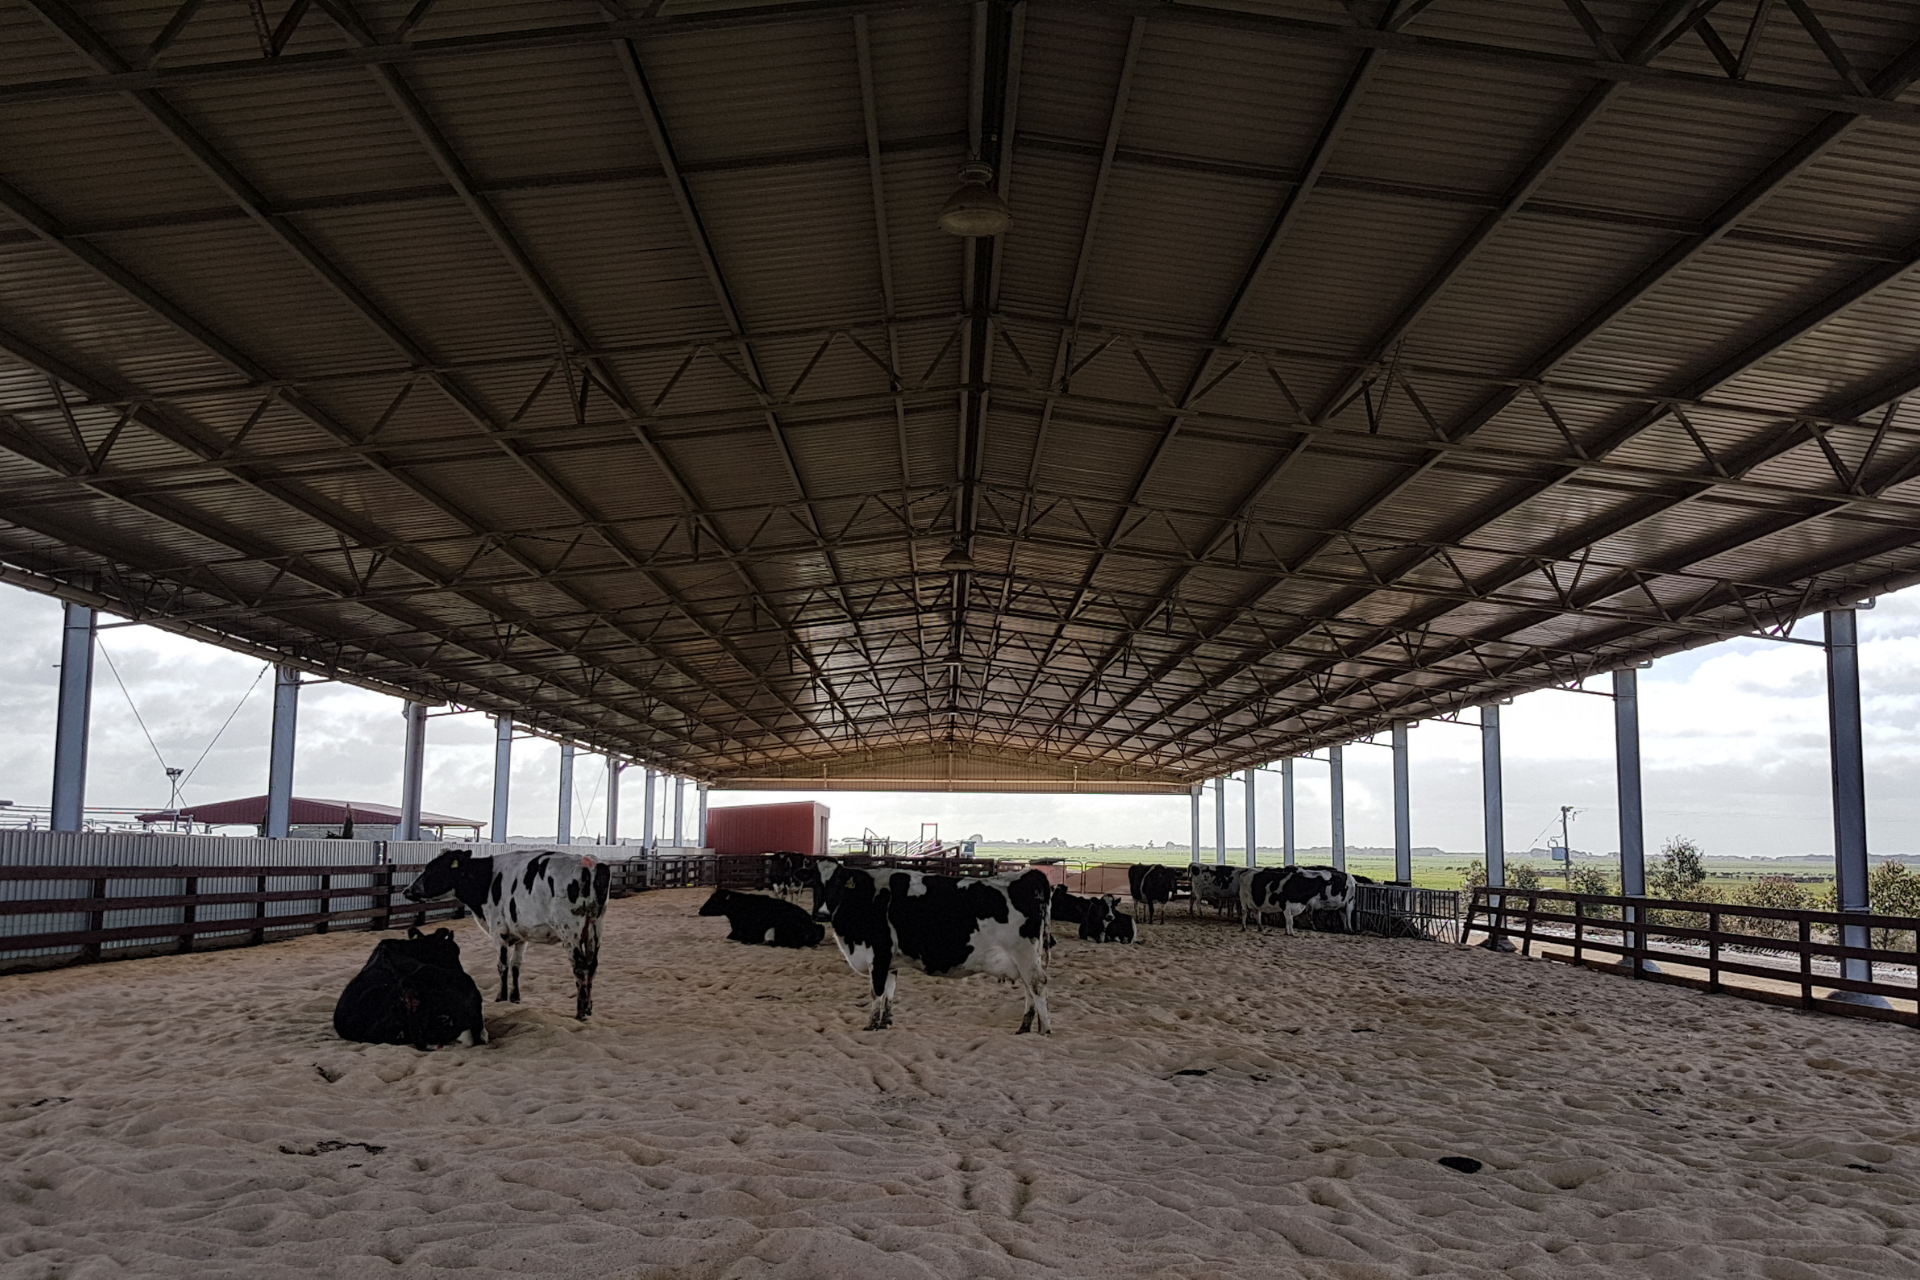 An 82.5m x 23m x 4.2m calving shelter at Grassmere VIC